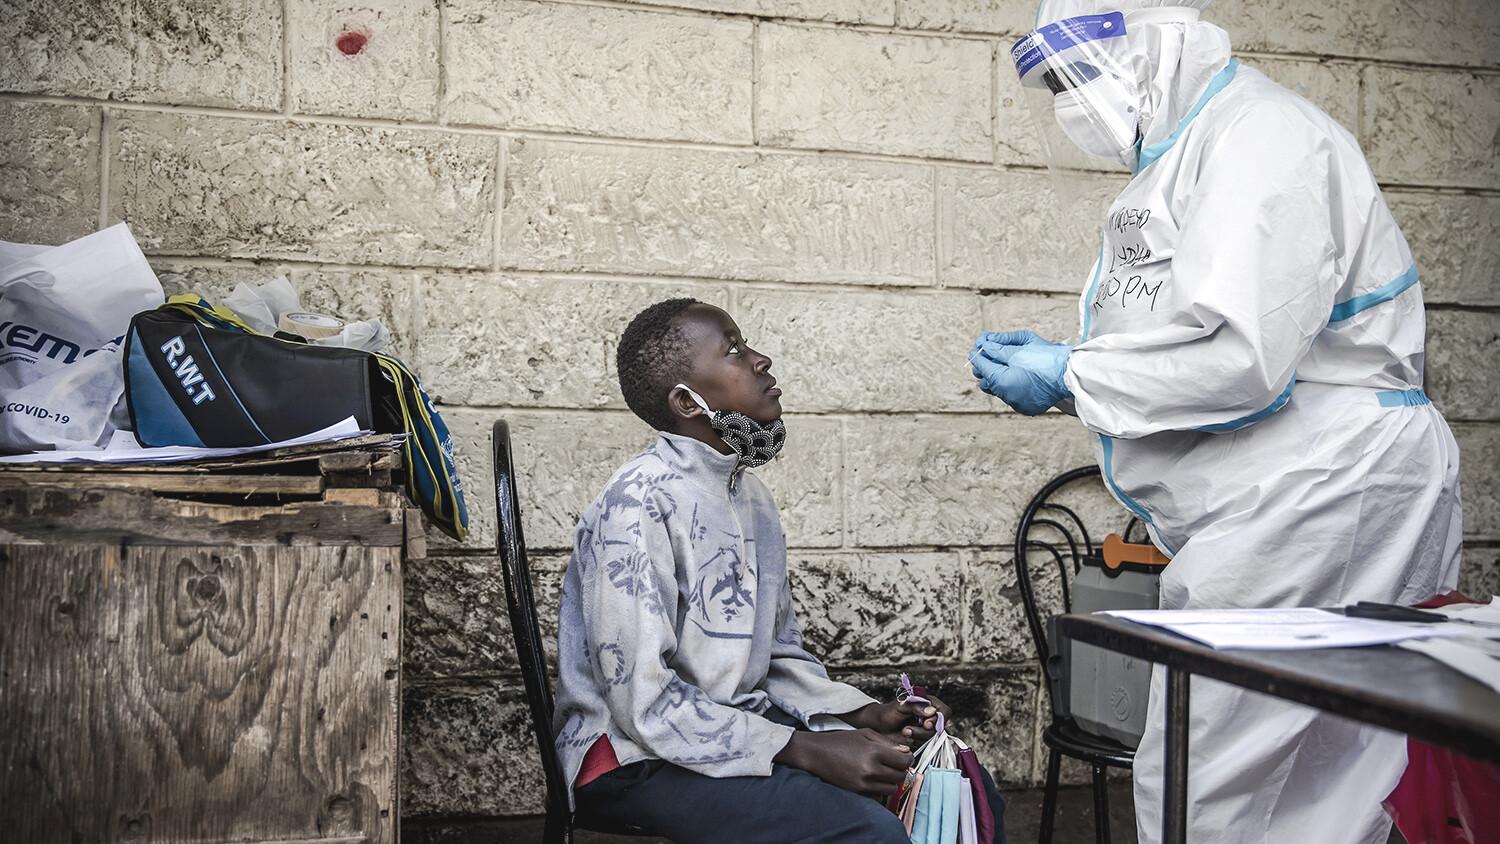 A kid selling face masks in the street and a health worker wearing a hazmat suit.